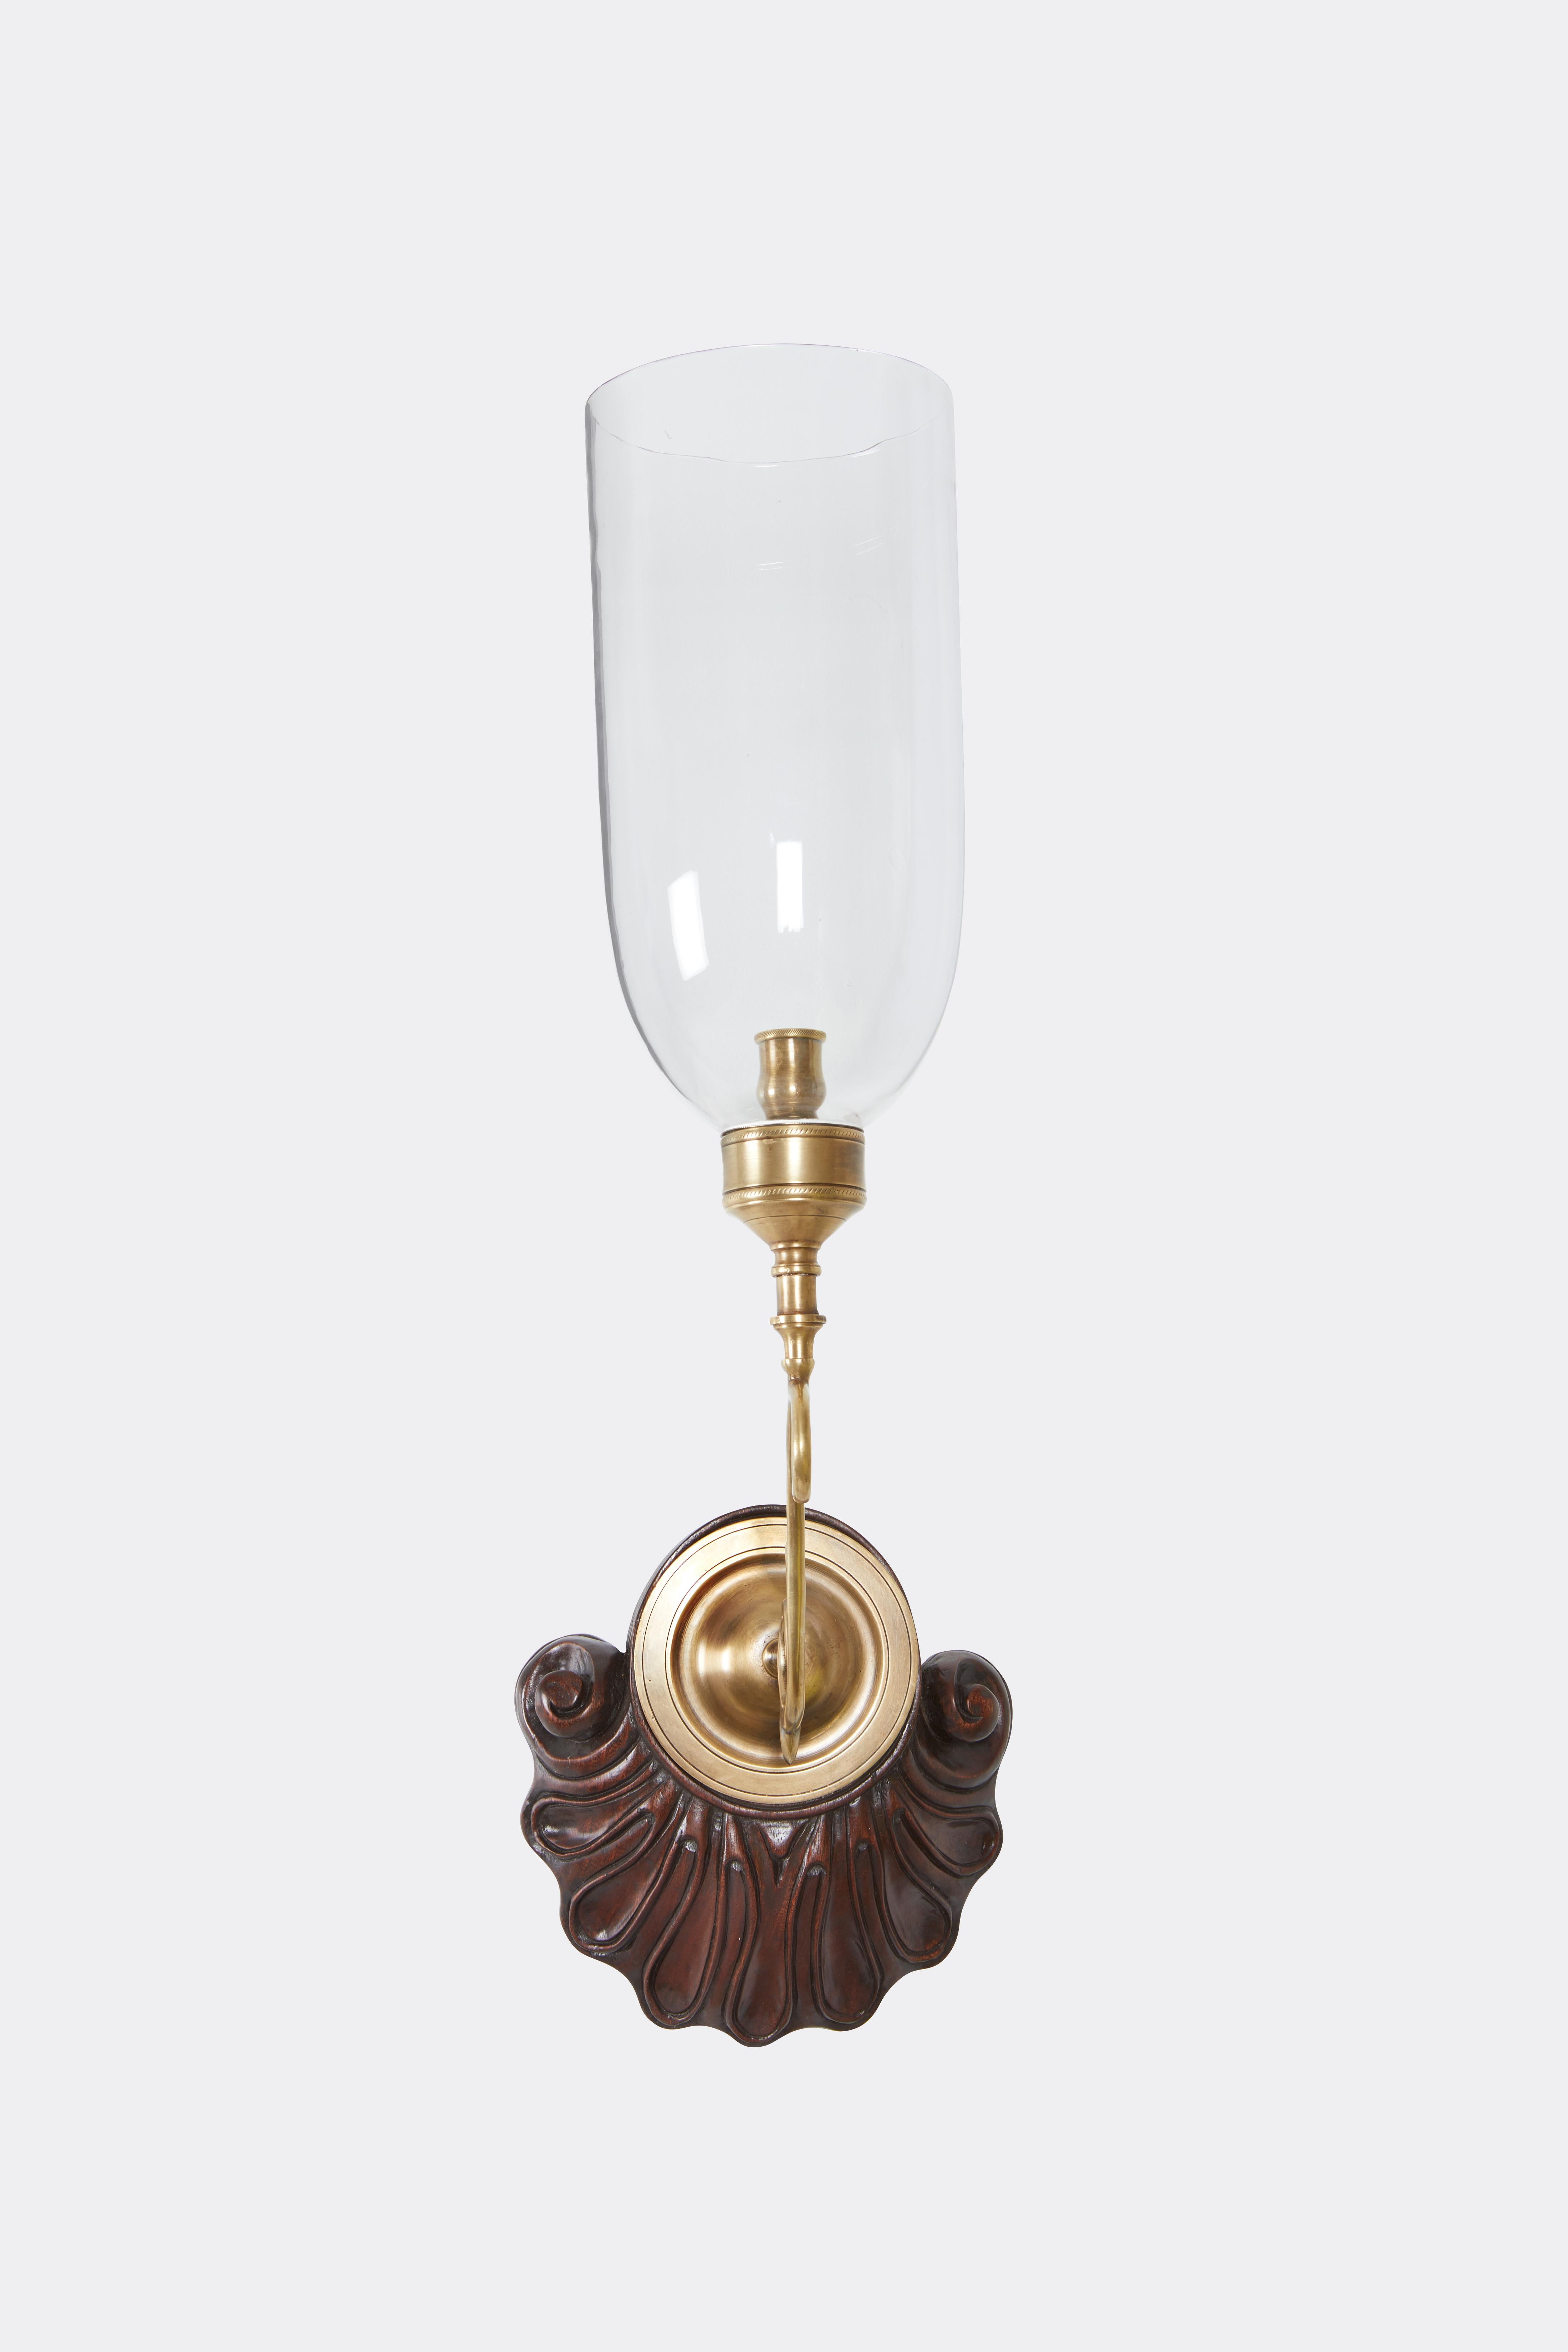 A pair of Georgian-style sconces with cast brass arms, glass hurricane shades, and hand carved mahogany backplates. 

Our custom hurricane sconces are available with wood, painted or gilt finishes. The backplates can be fitted with brass or nickel